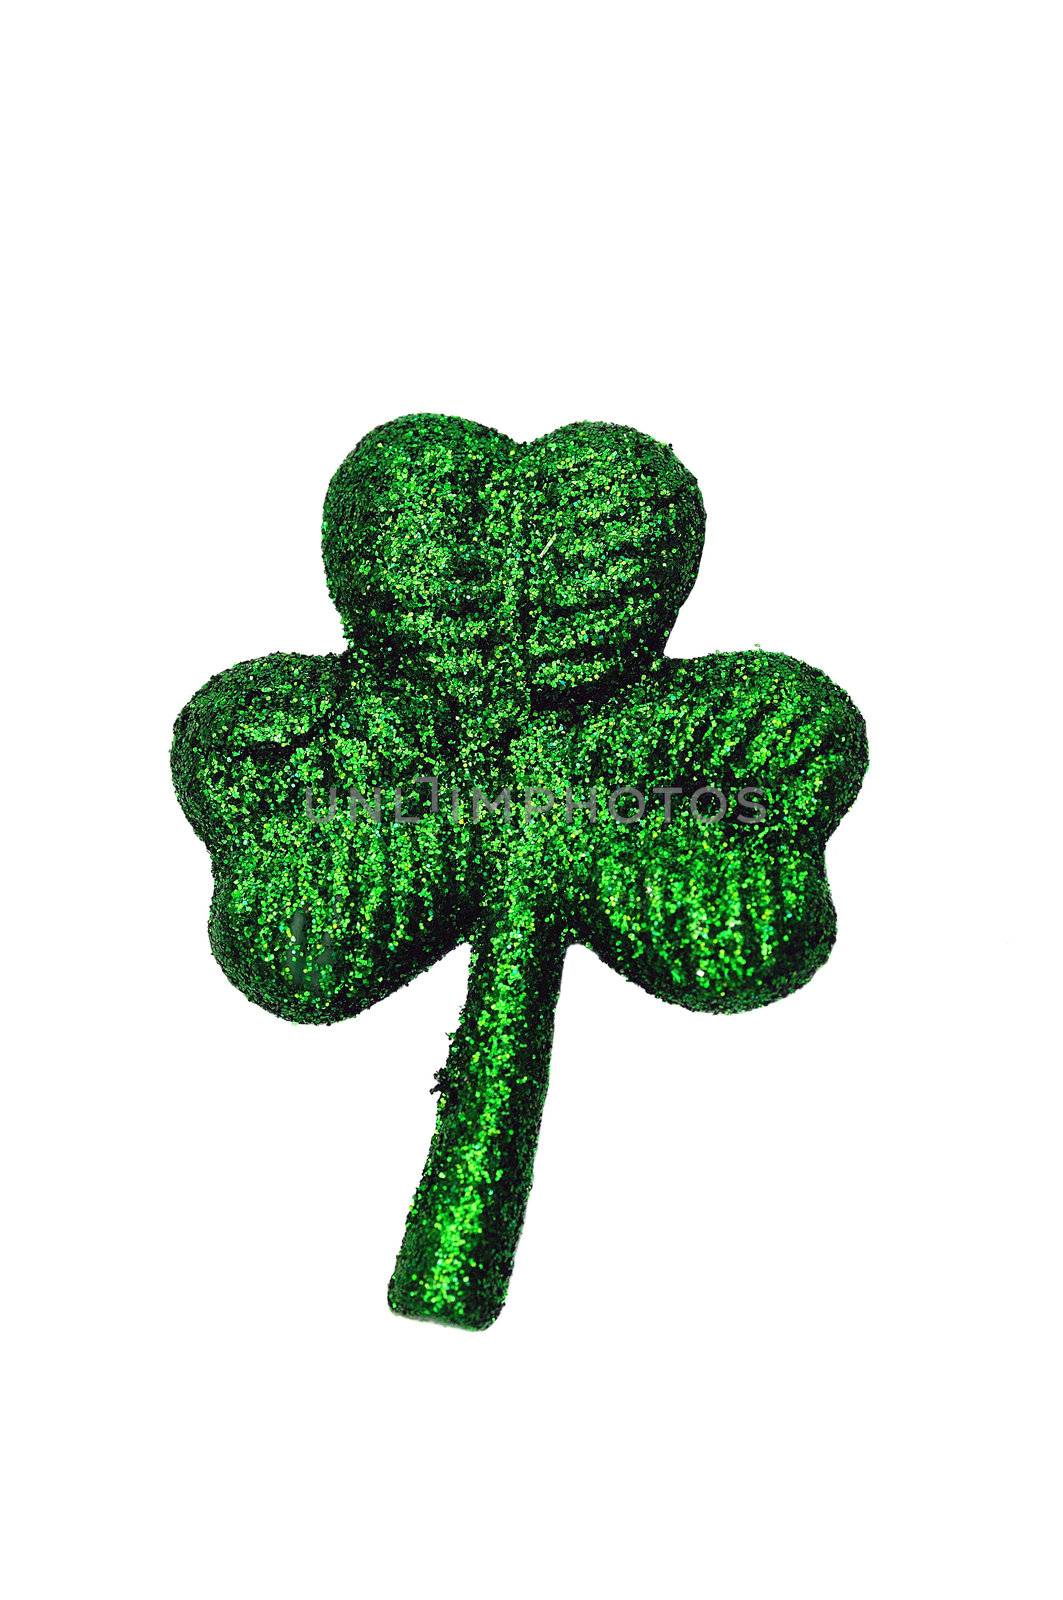 Four leafs clover symbol signifying ST Patrick day